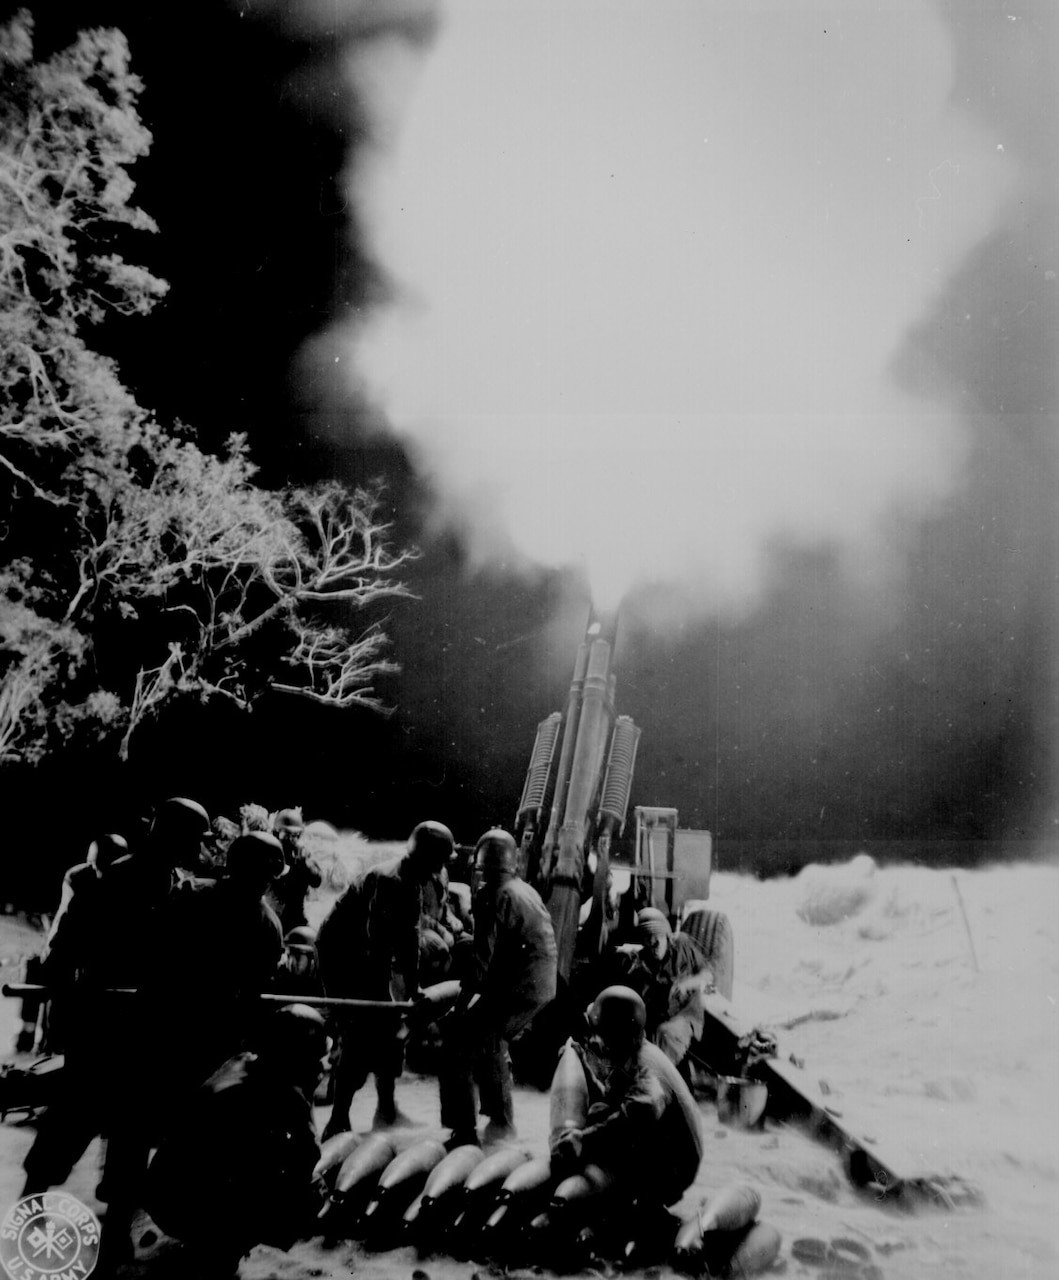 Soldiers fire a large gun at night.